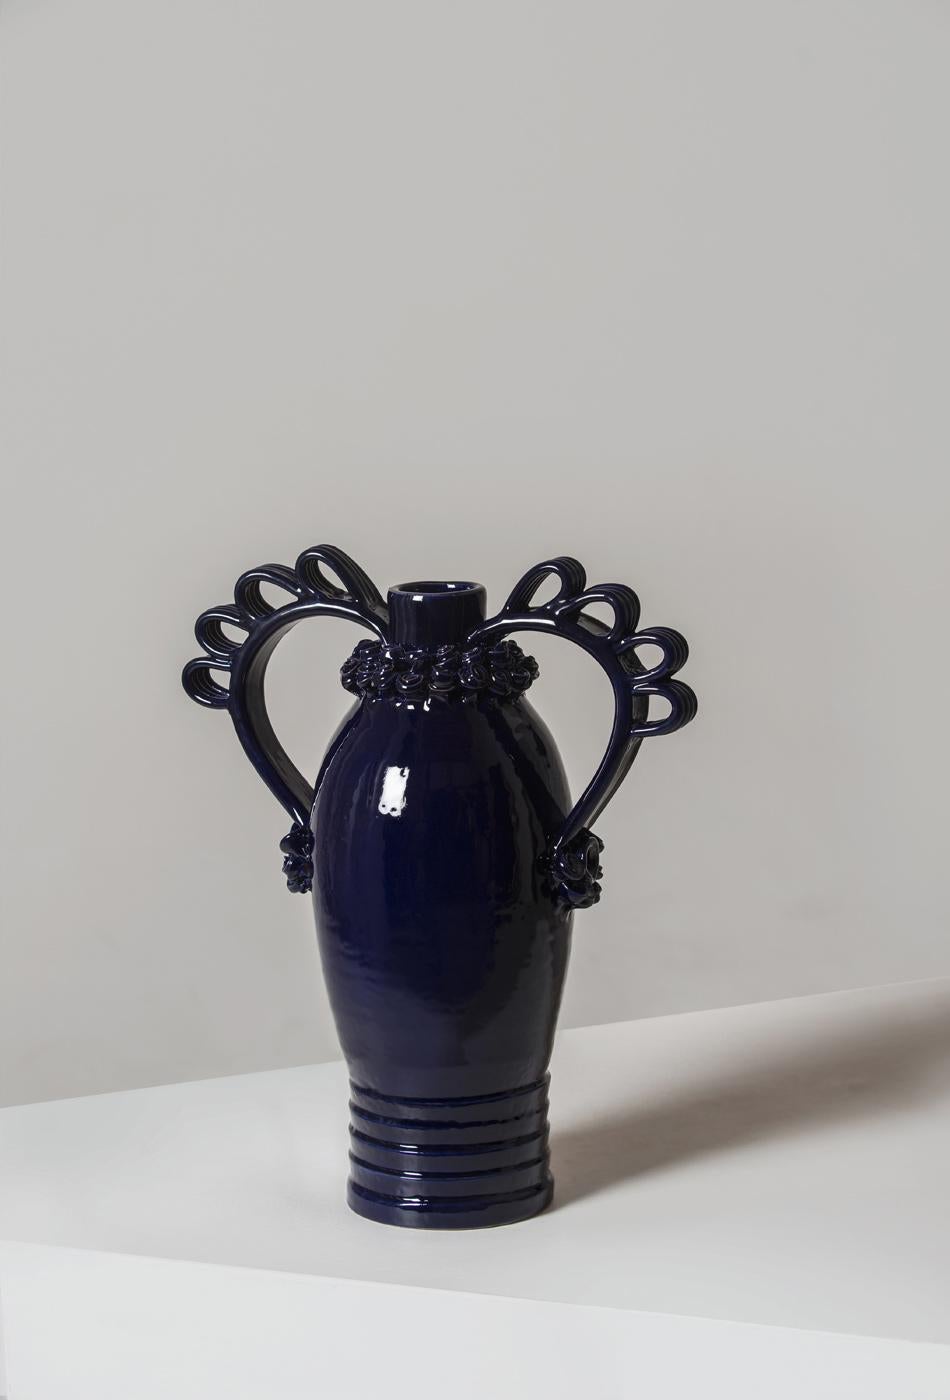 The Marria Vase is part of the collection 